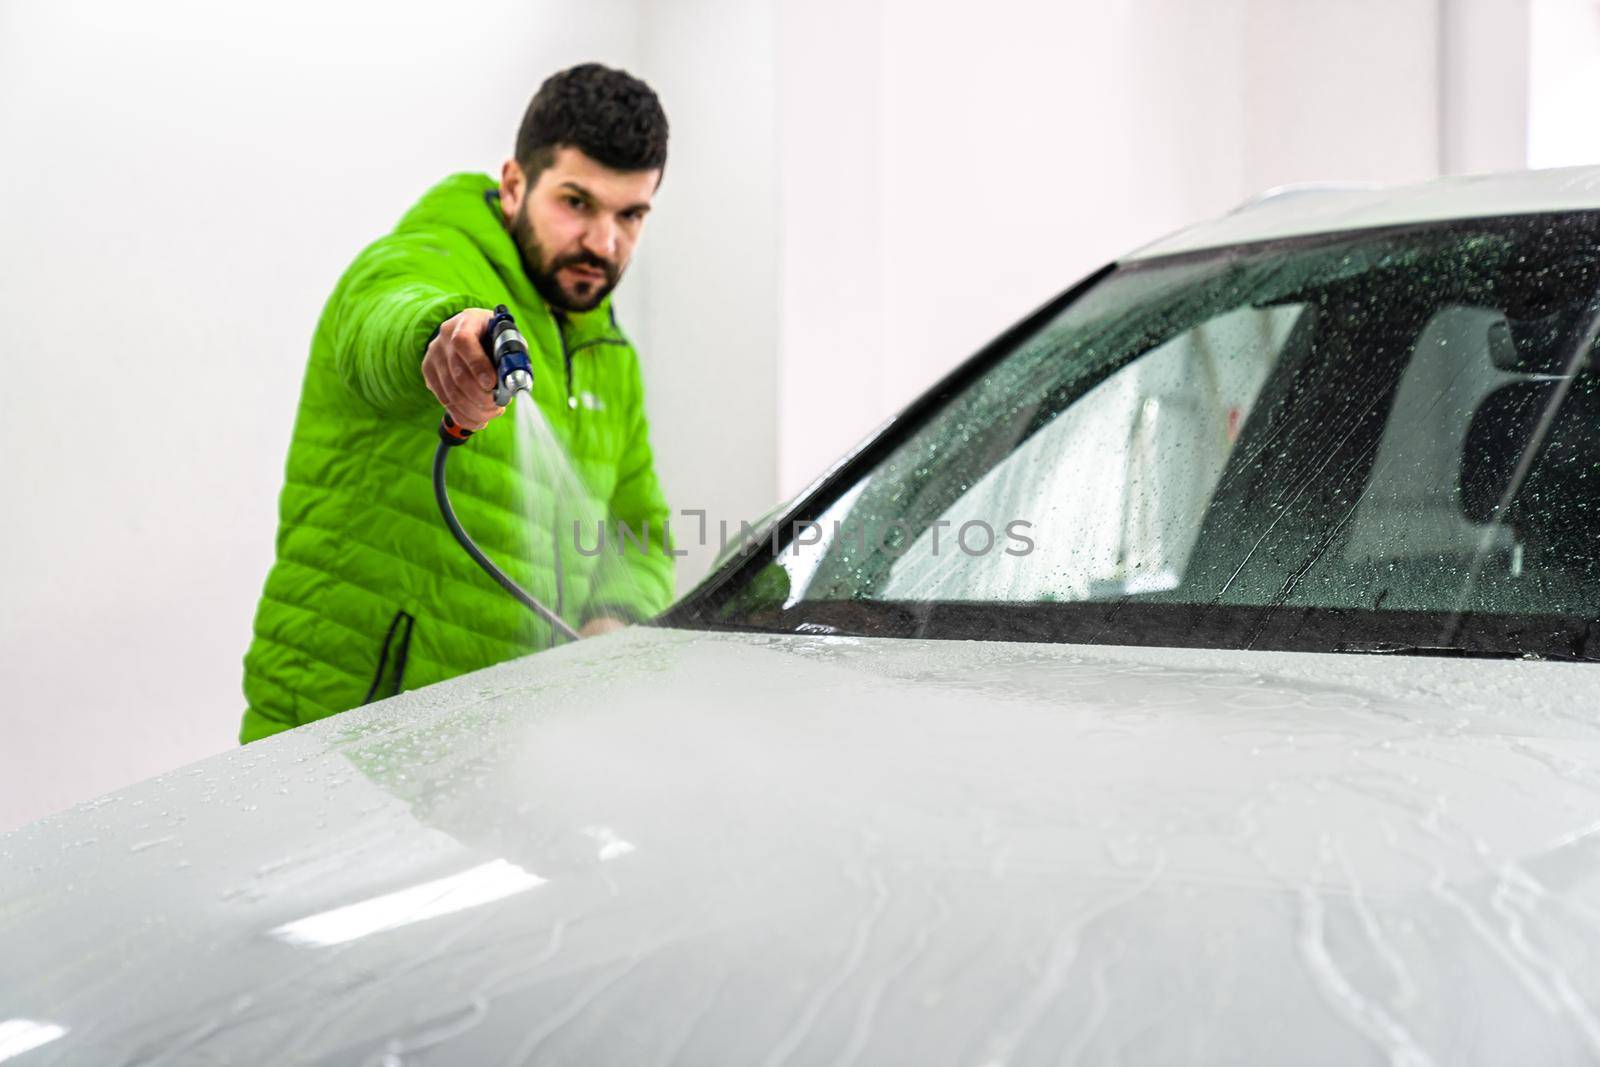 wash the car by spraying water from a high pressure hose with foam by Edophoto